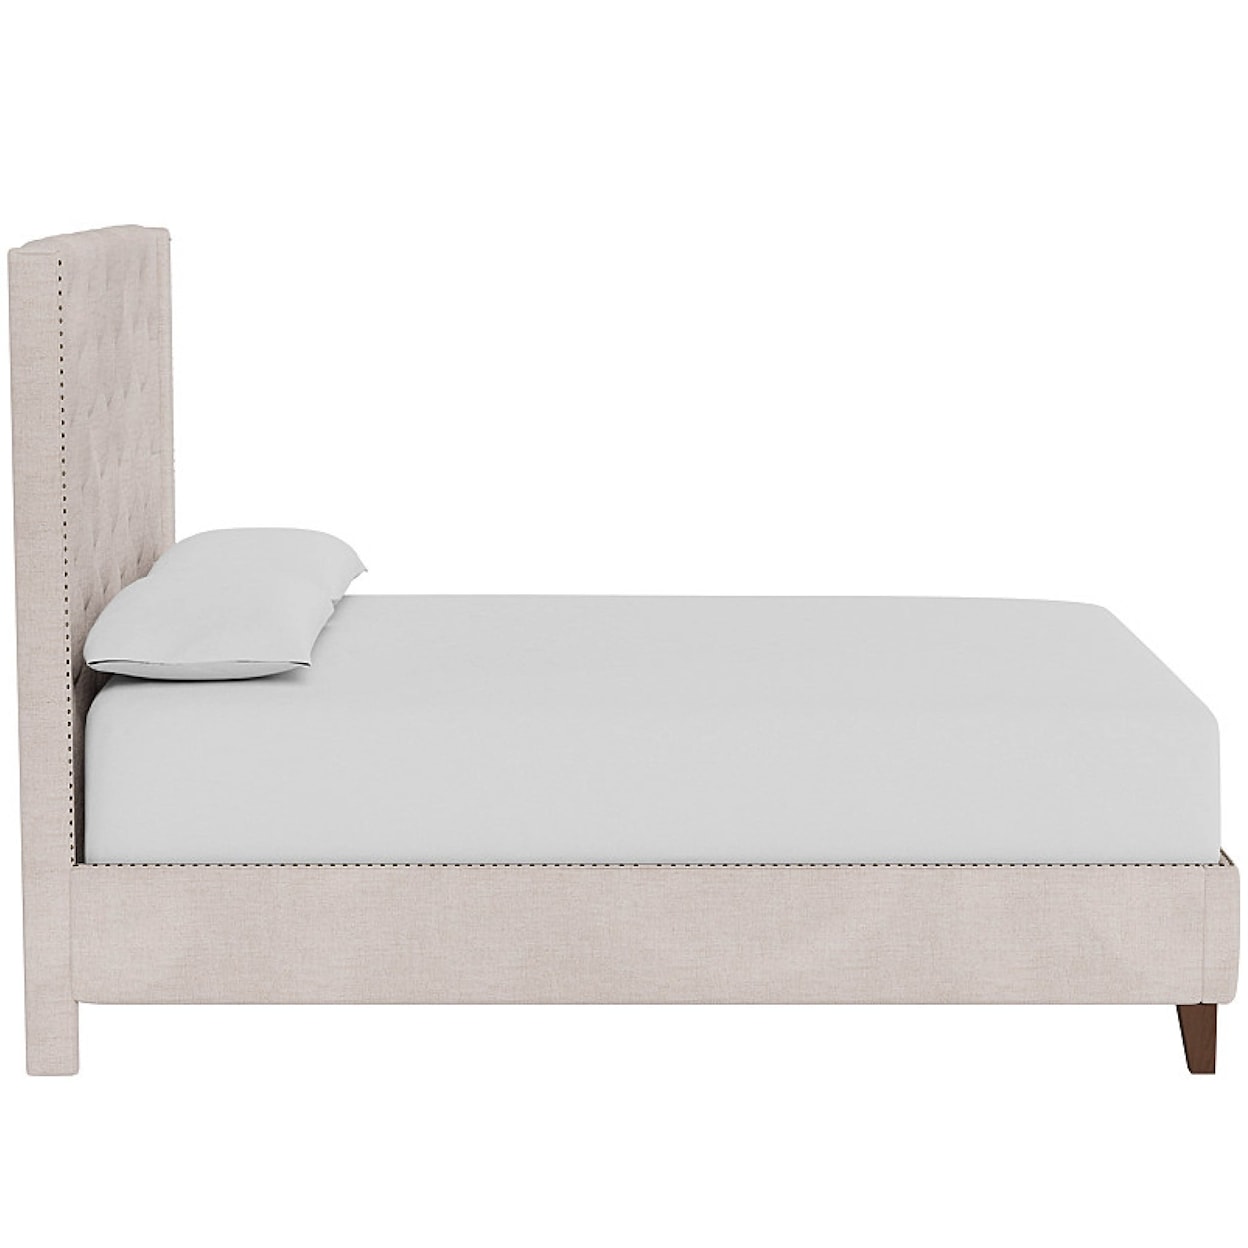 Universal Special Order King Panache Bed